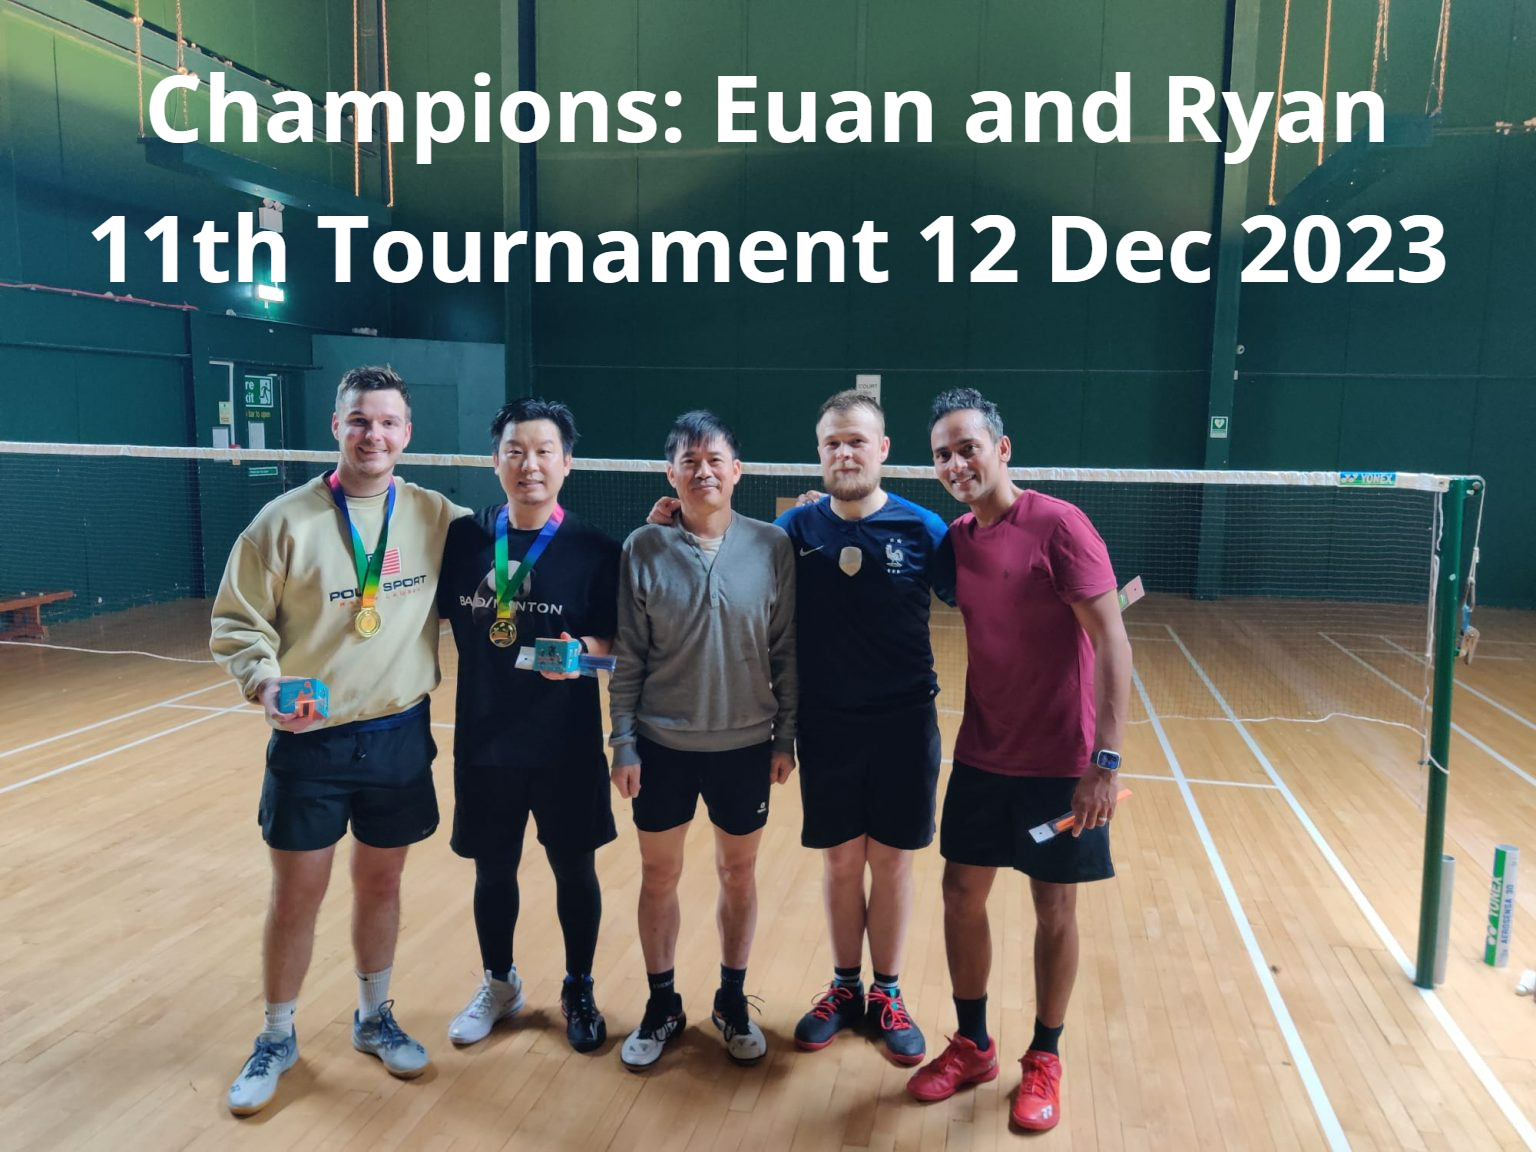 Champions of the 11th tournament 19 Dec 2023, Euan and Ryan Wang